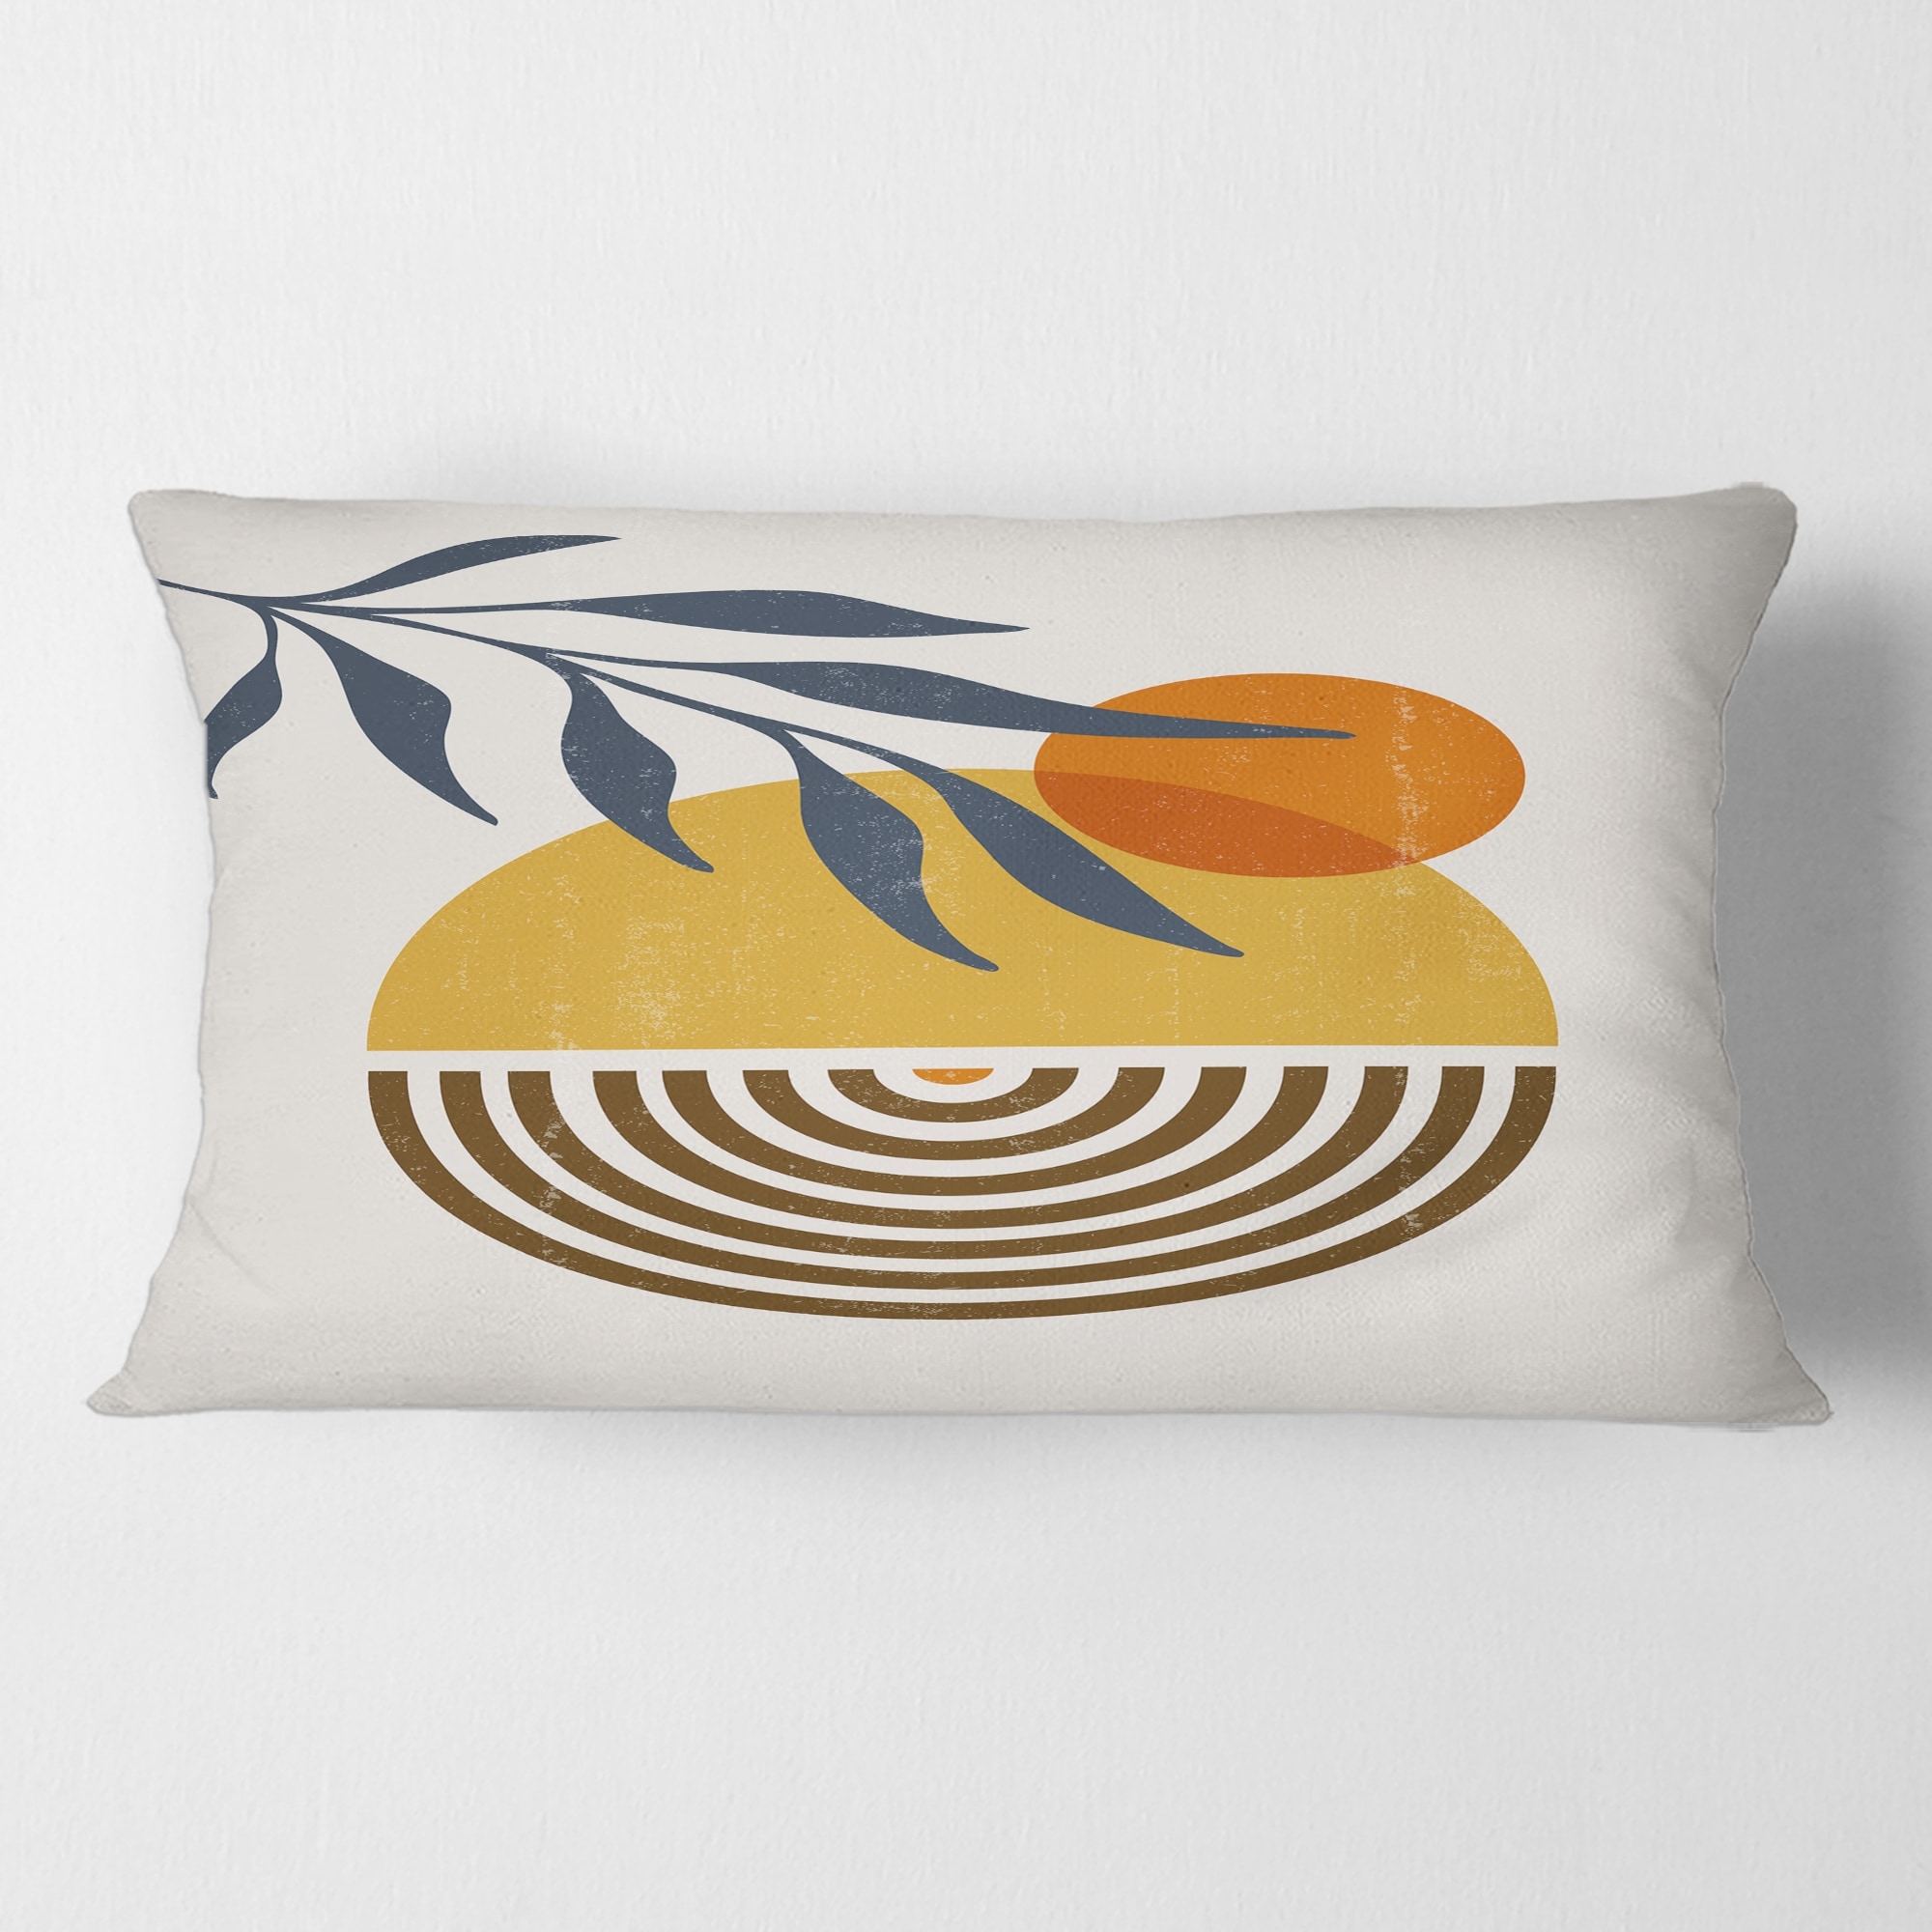 Designart 'Botanical Minimalist Leaf With Abstract Shapes IV' Modern Printed Throw Pillow